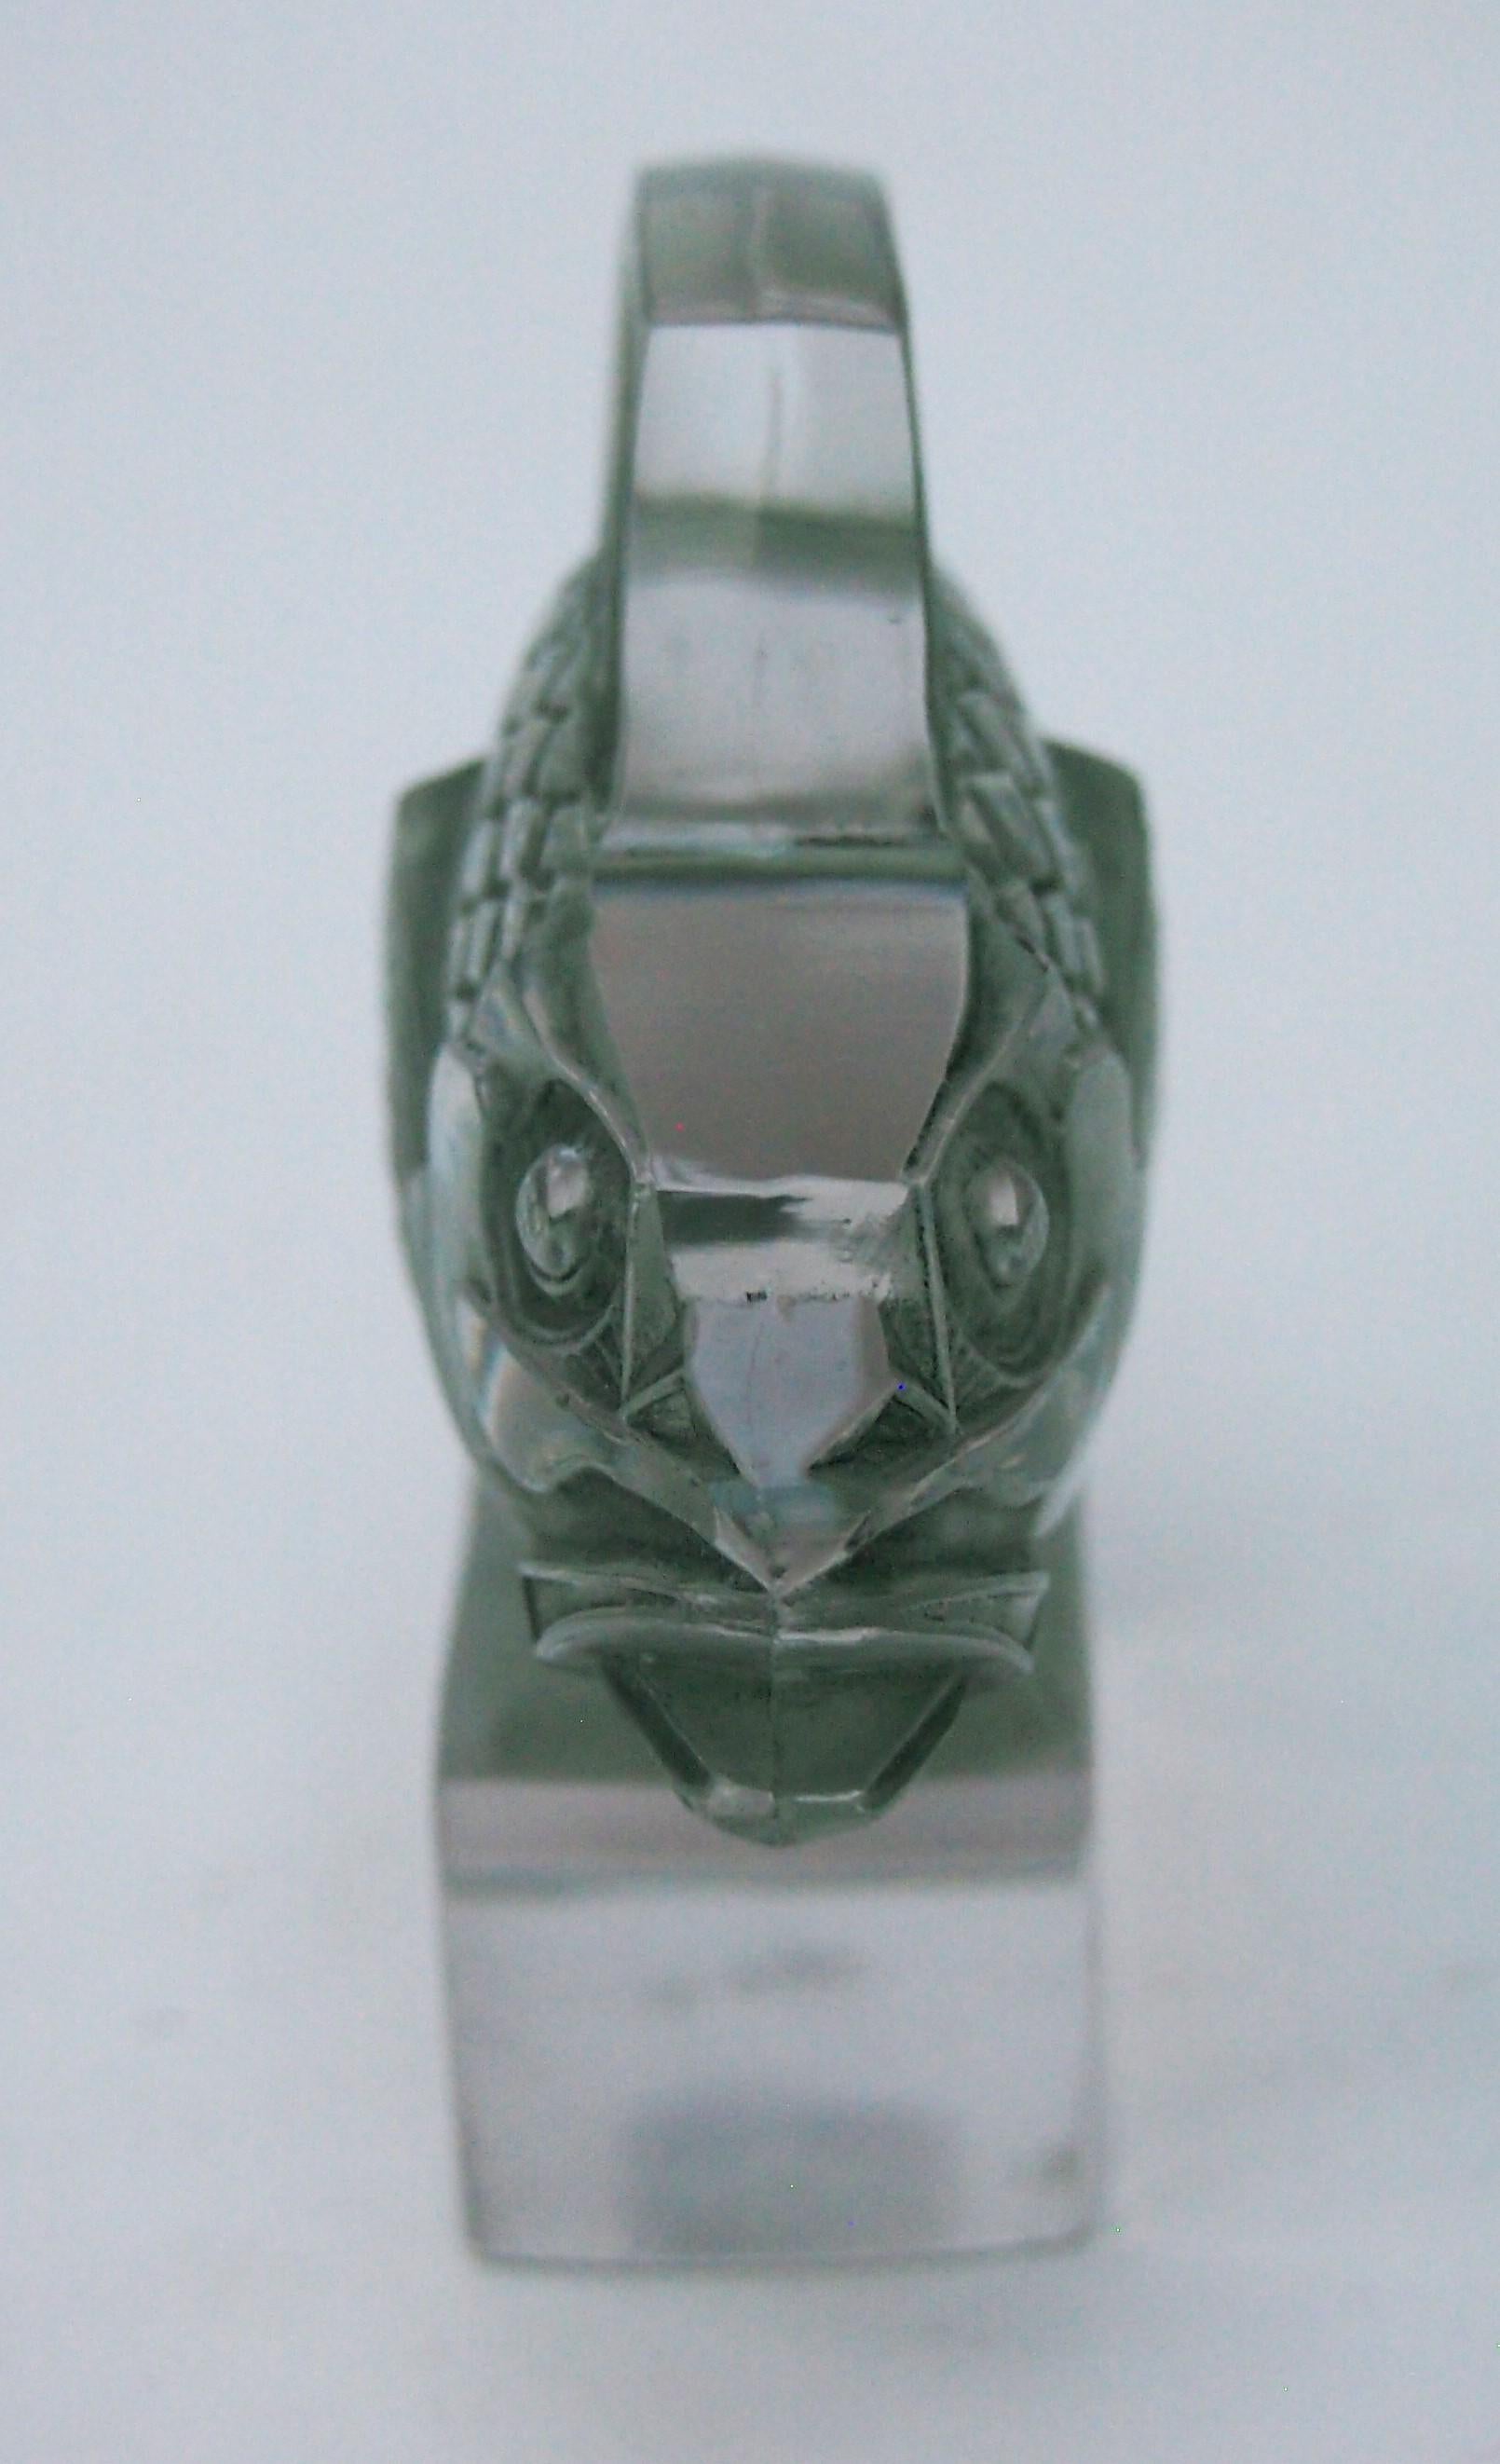 Classic and rare Rene Lalique 'Barbillon' fish  paperweight in original dark green staining. The paperweight shows a stylised Art Deco ugly beautiful fish -with prominent scales and small bug eyes standing on a small rectangular block base -this is